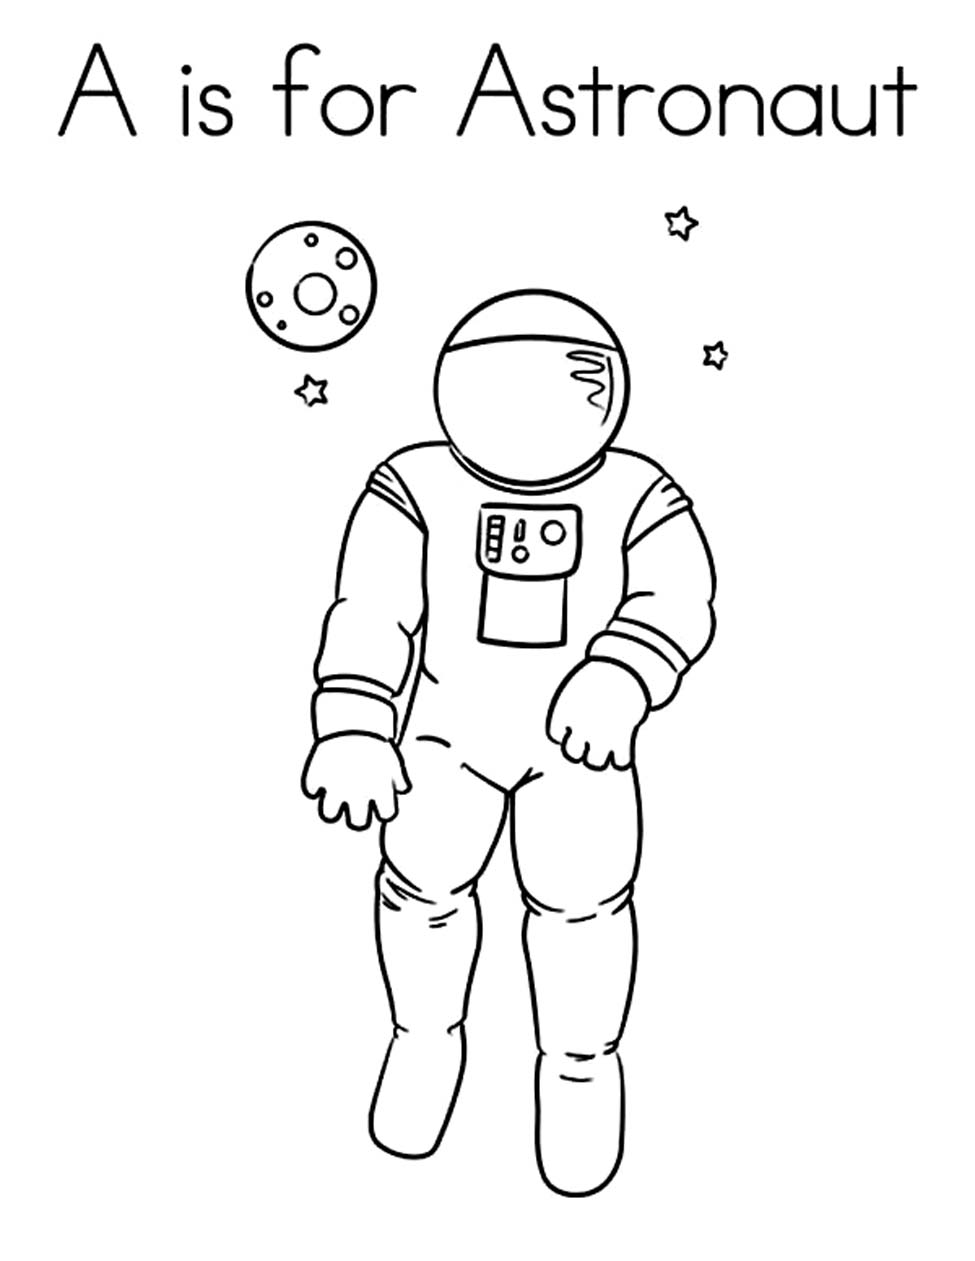 Astronaut coloring #12, Download drawings